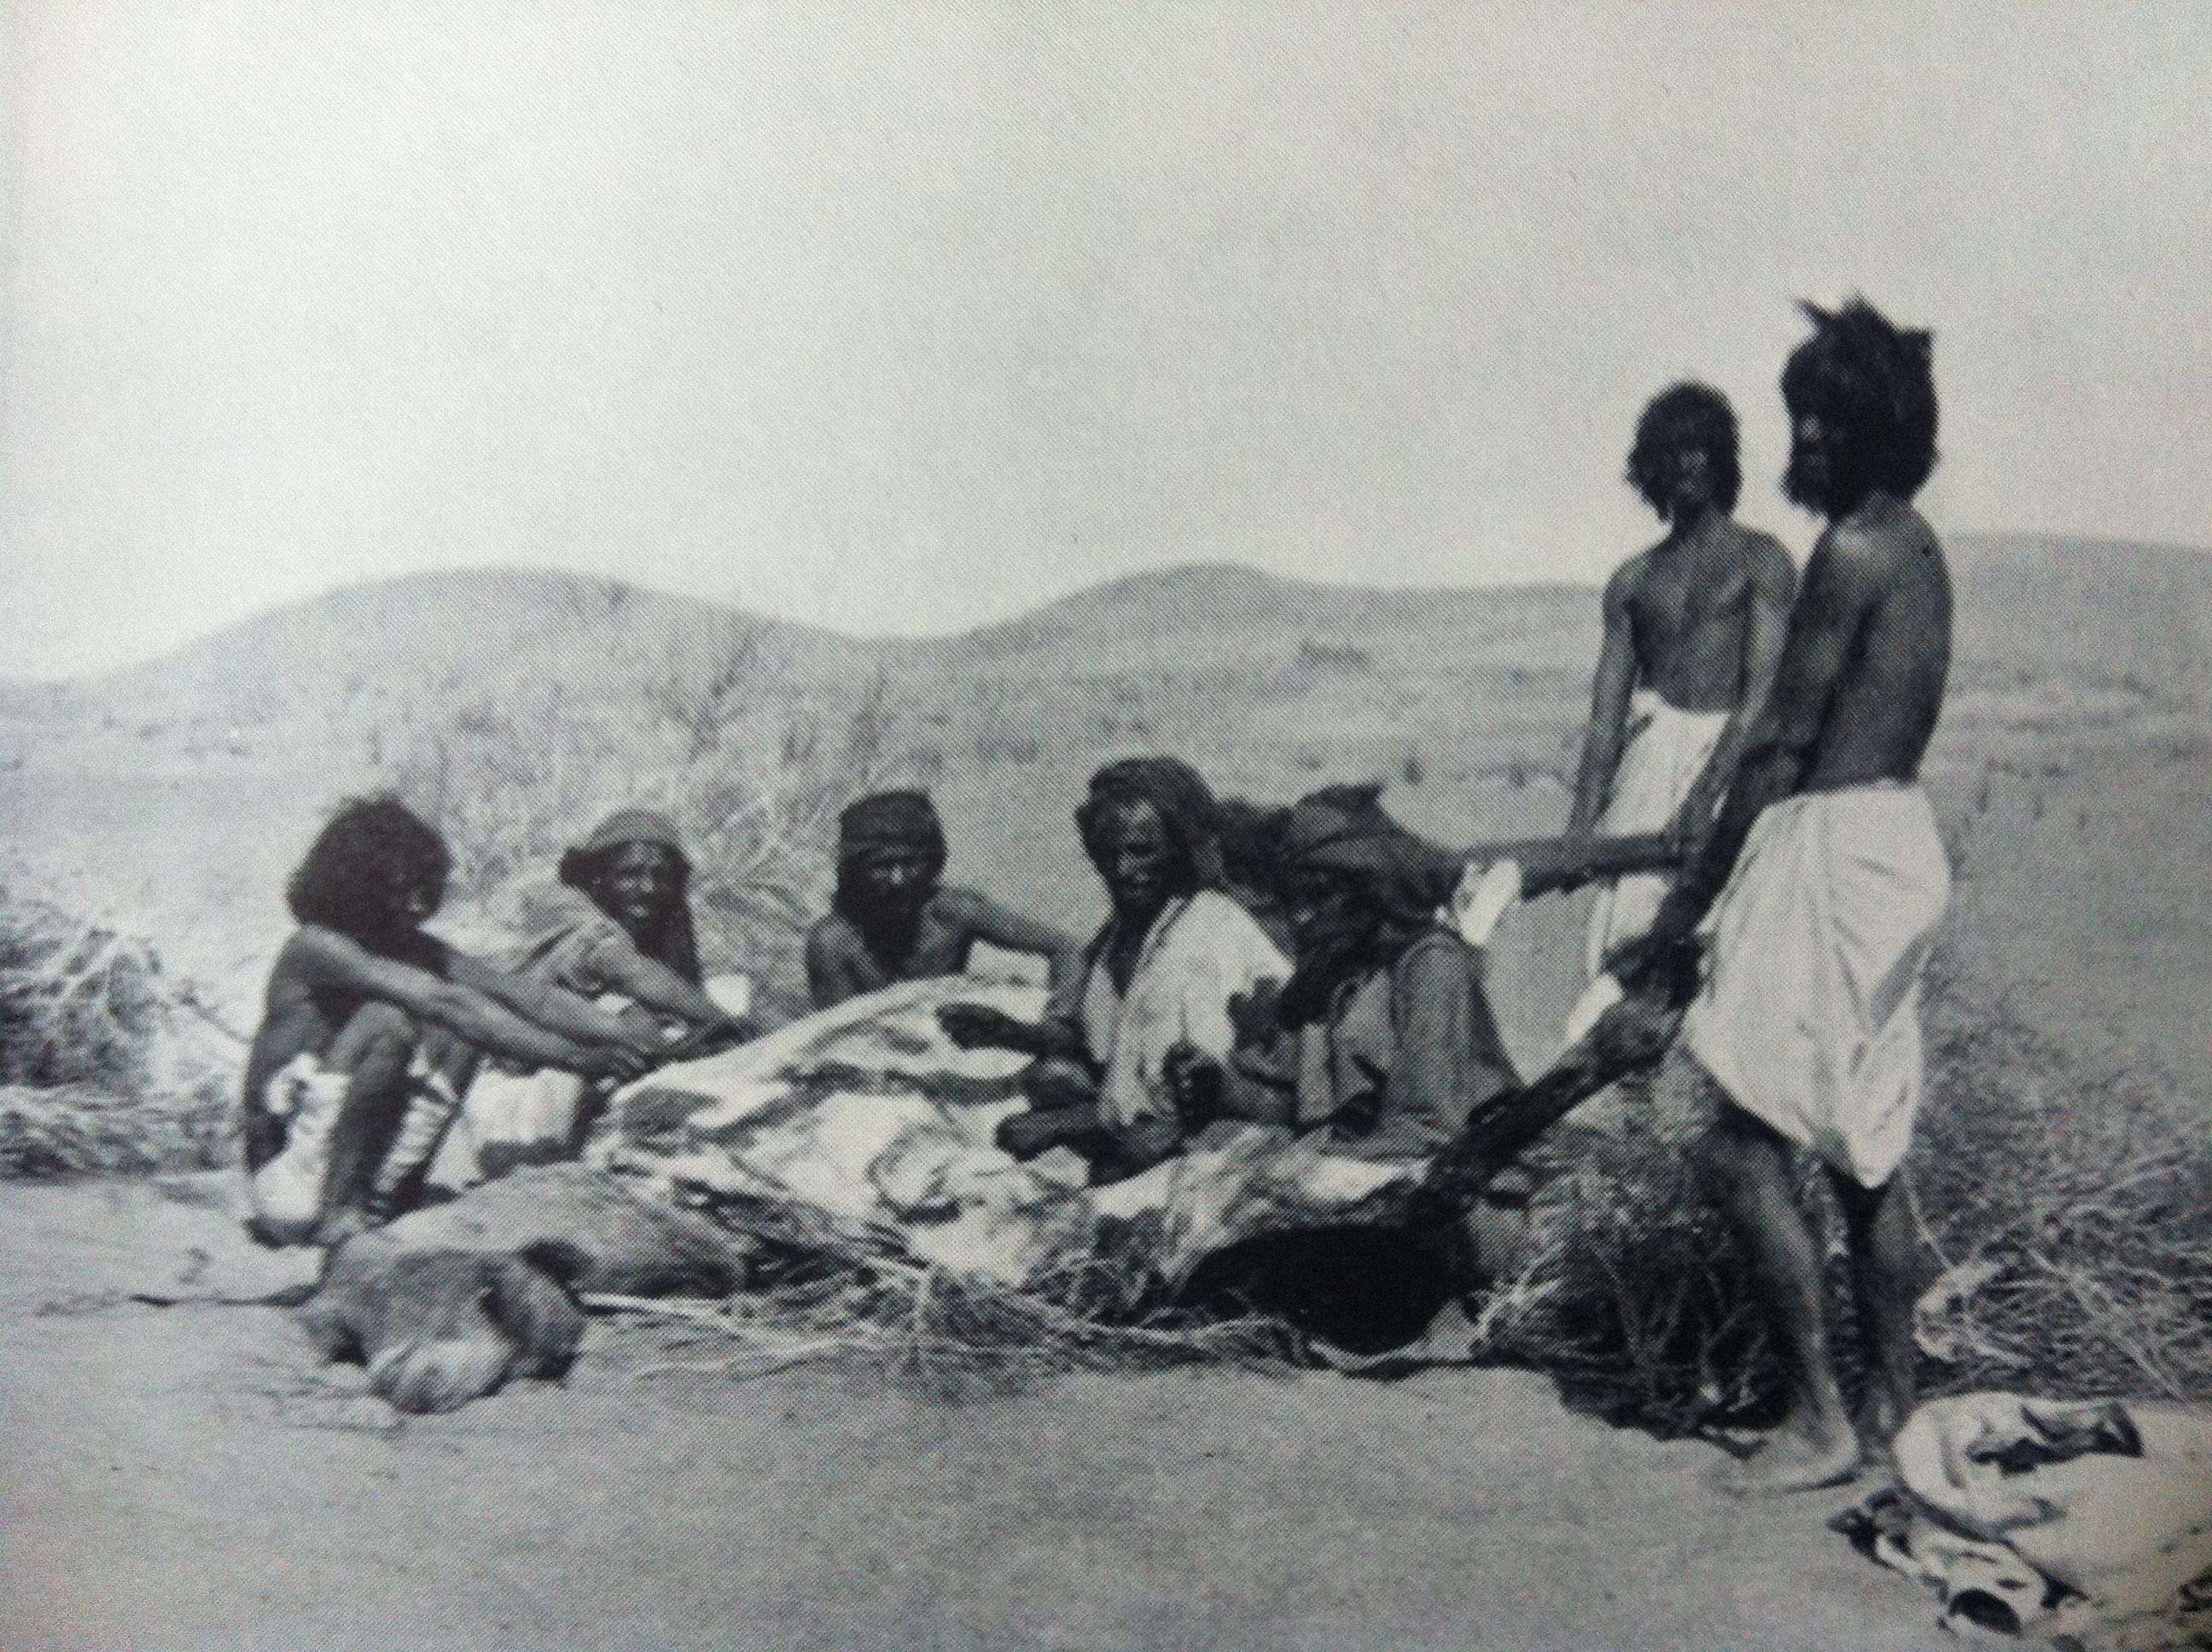 Shammar Arab men in the Nejd region, Saudi Arabia. The Y-DNA haplogroup J is today the most common paternal clade borne by the Shammar Arabs and other Semitic-speaking individuals. This lineage appears to have originated in the Caucasus/Iranian plateau, from where it was later introduced to the Semites' Levantine ancestors. Consequently, the Socotri, Mahra and other South Arab groups, who have retained the most Natufian ancestry, are also the Semitic peoples with the highest frequencies of the oldest haplogroup J derivatives.